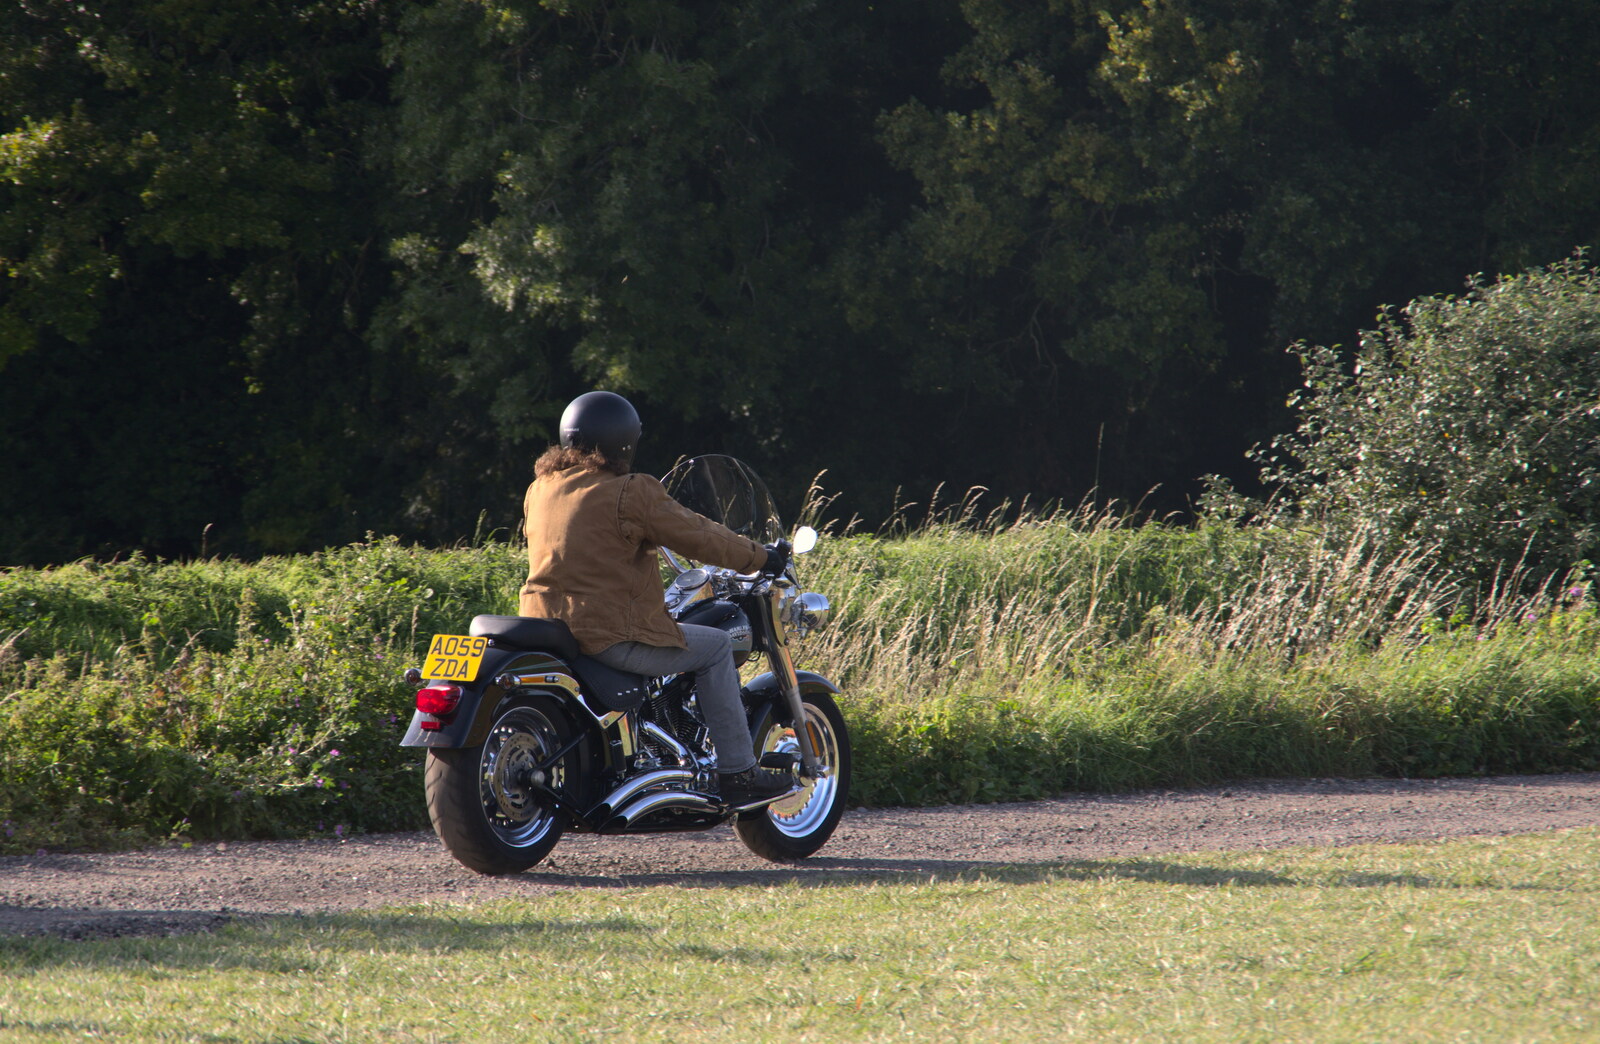 A motorbike rides around from Star Wing's Hops and Hogs Festival, Redgrave, Suffolk - 12th September 2020